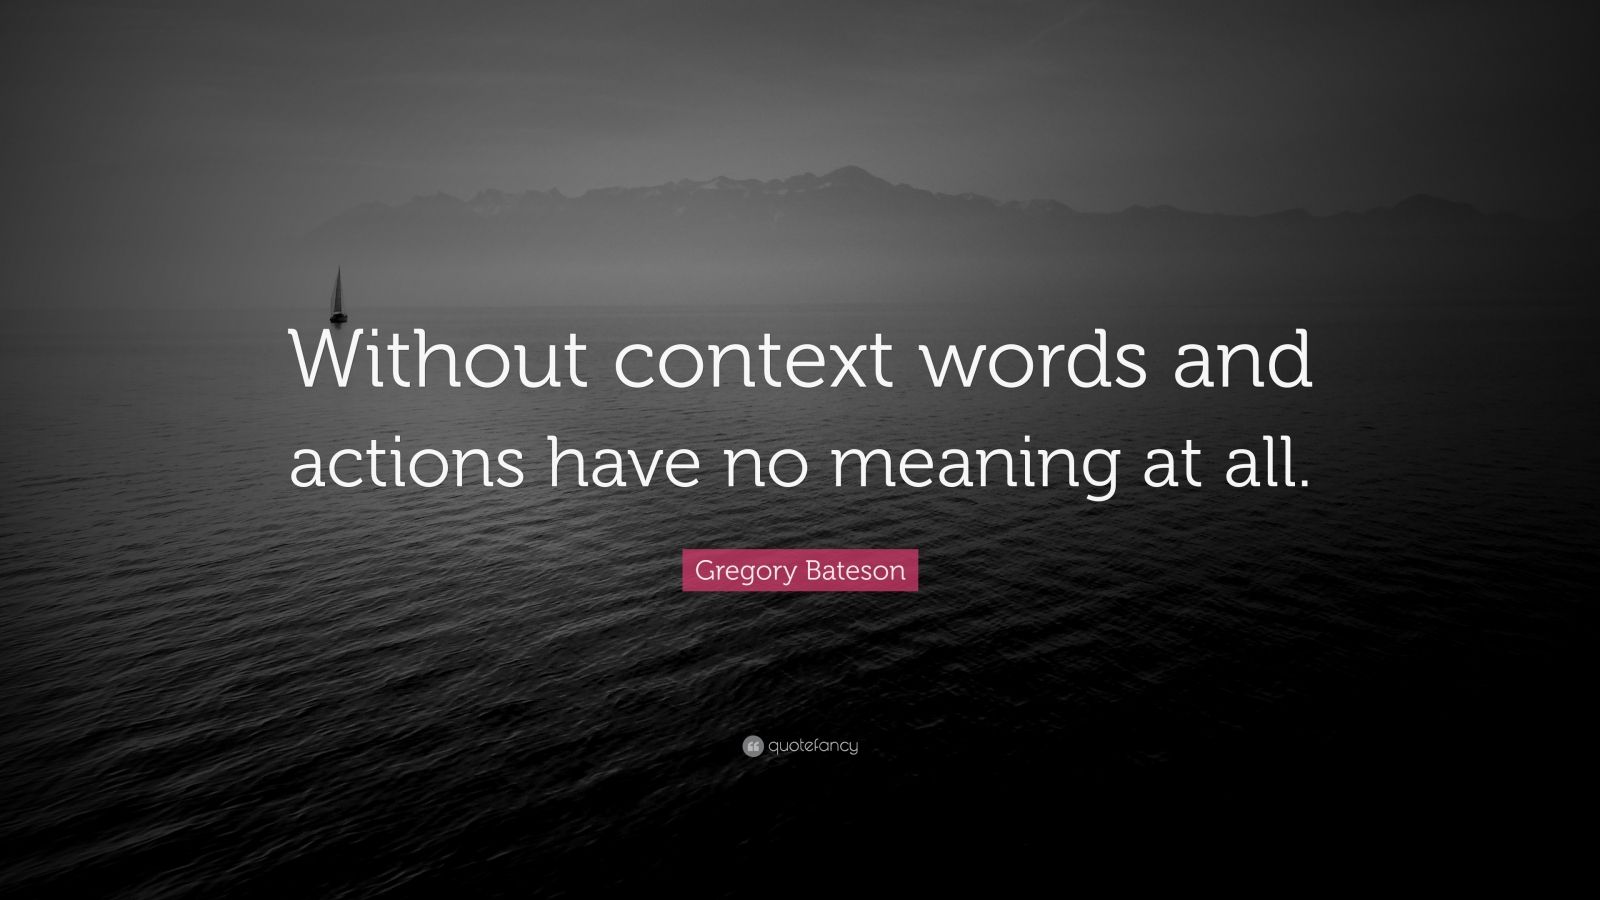 Gregory Bateson Quote: “Without context words and actions have no